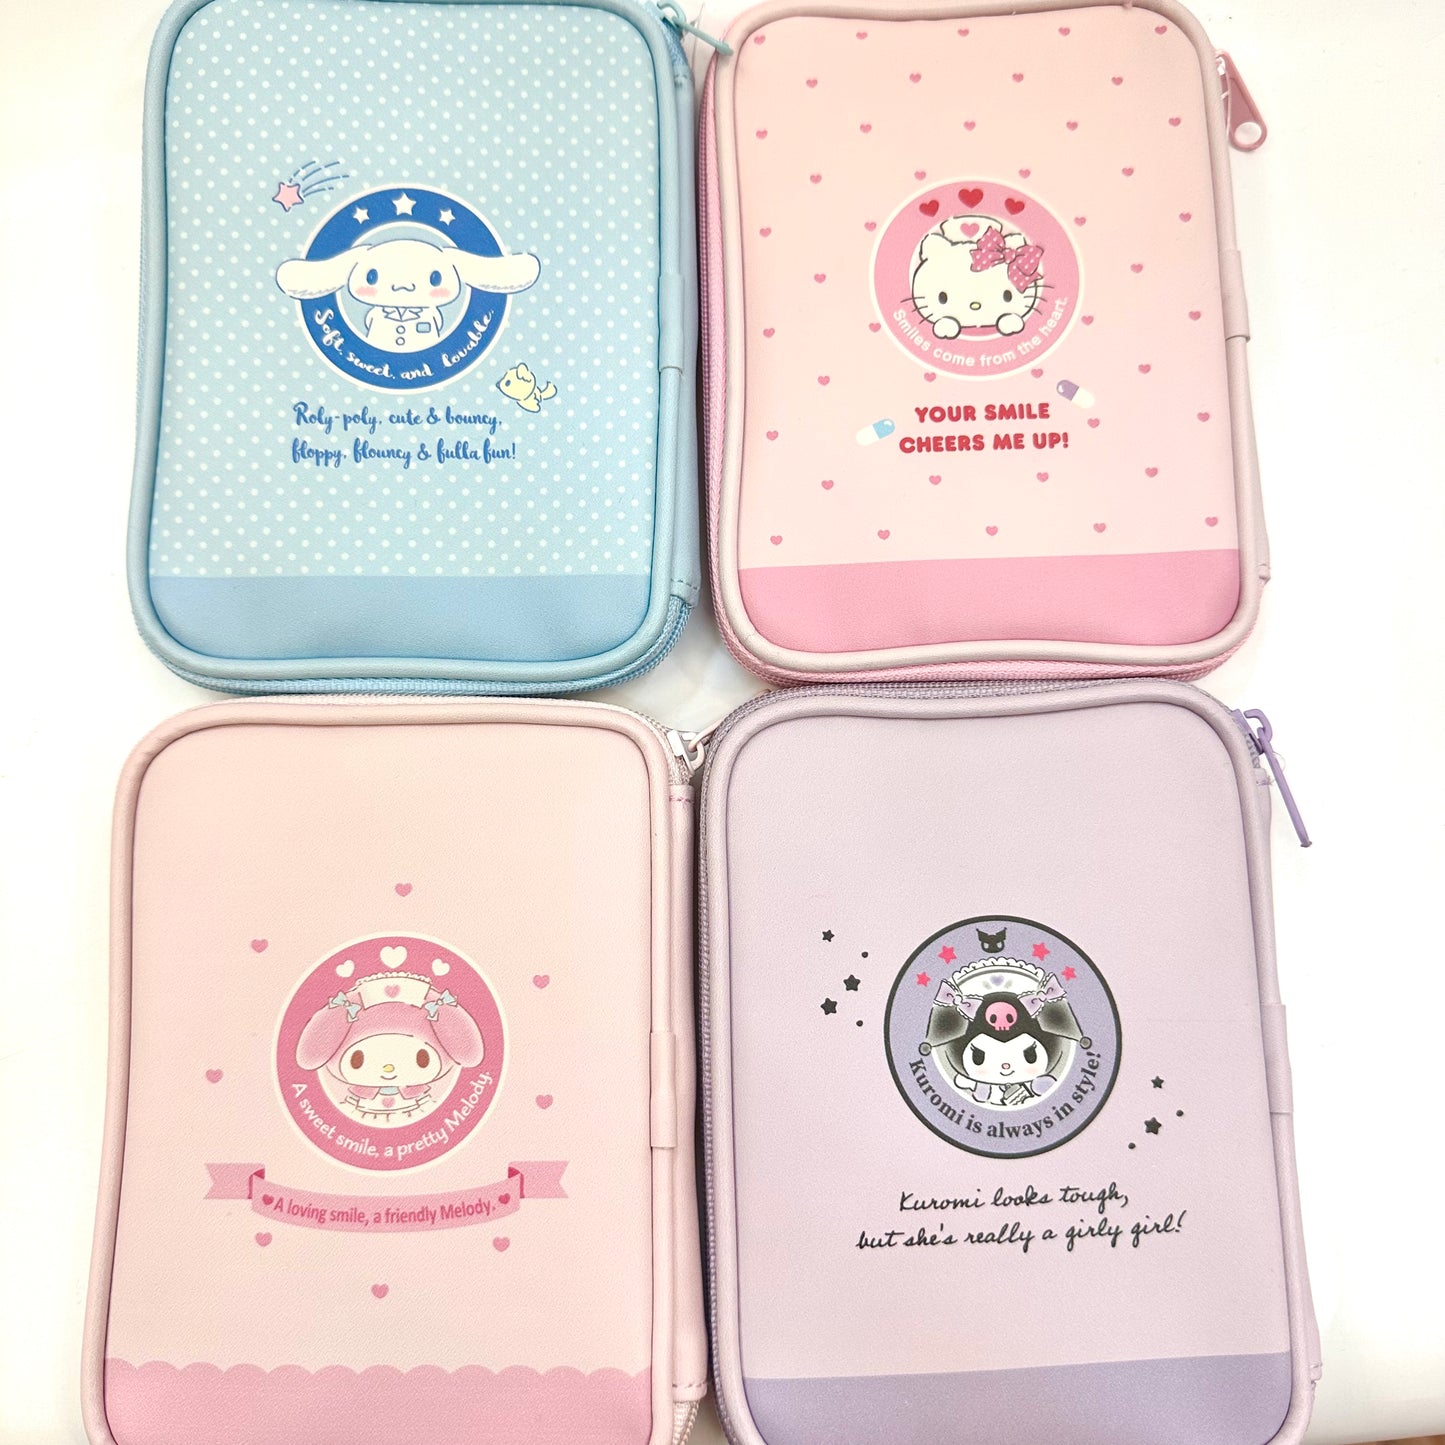 Sanrio Small Medical Carry Pouch